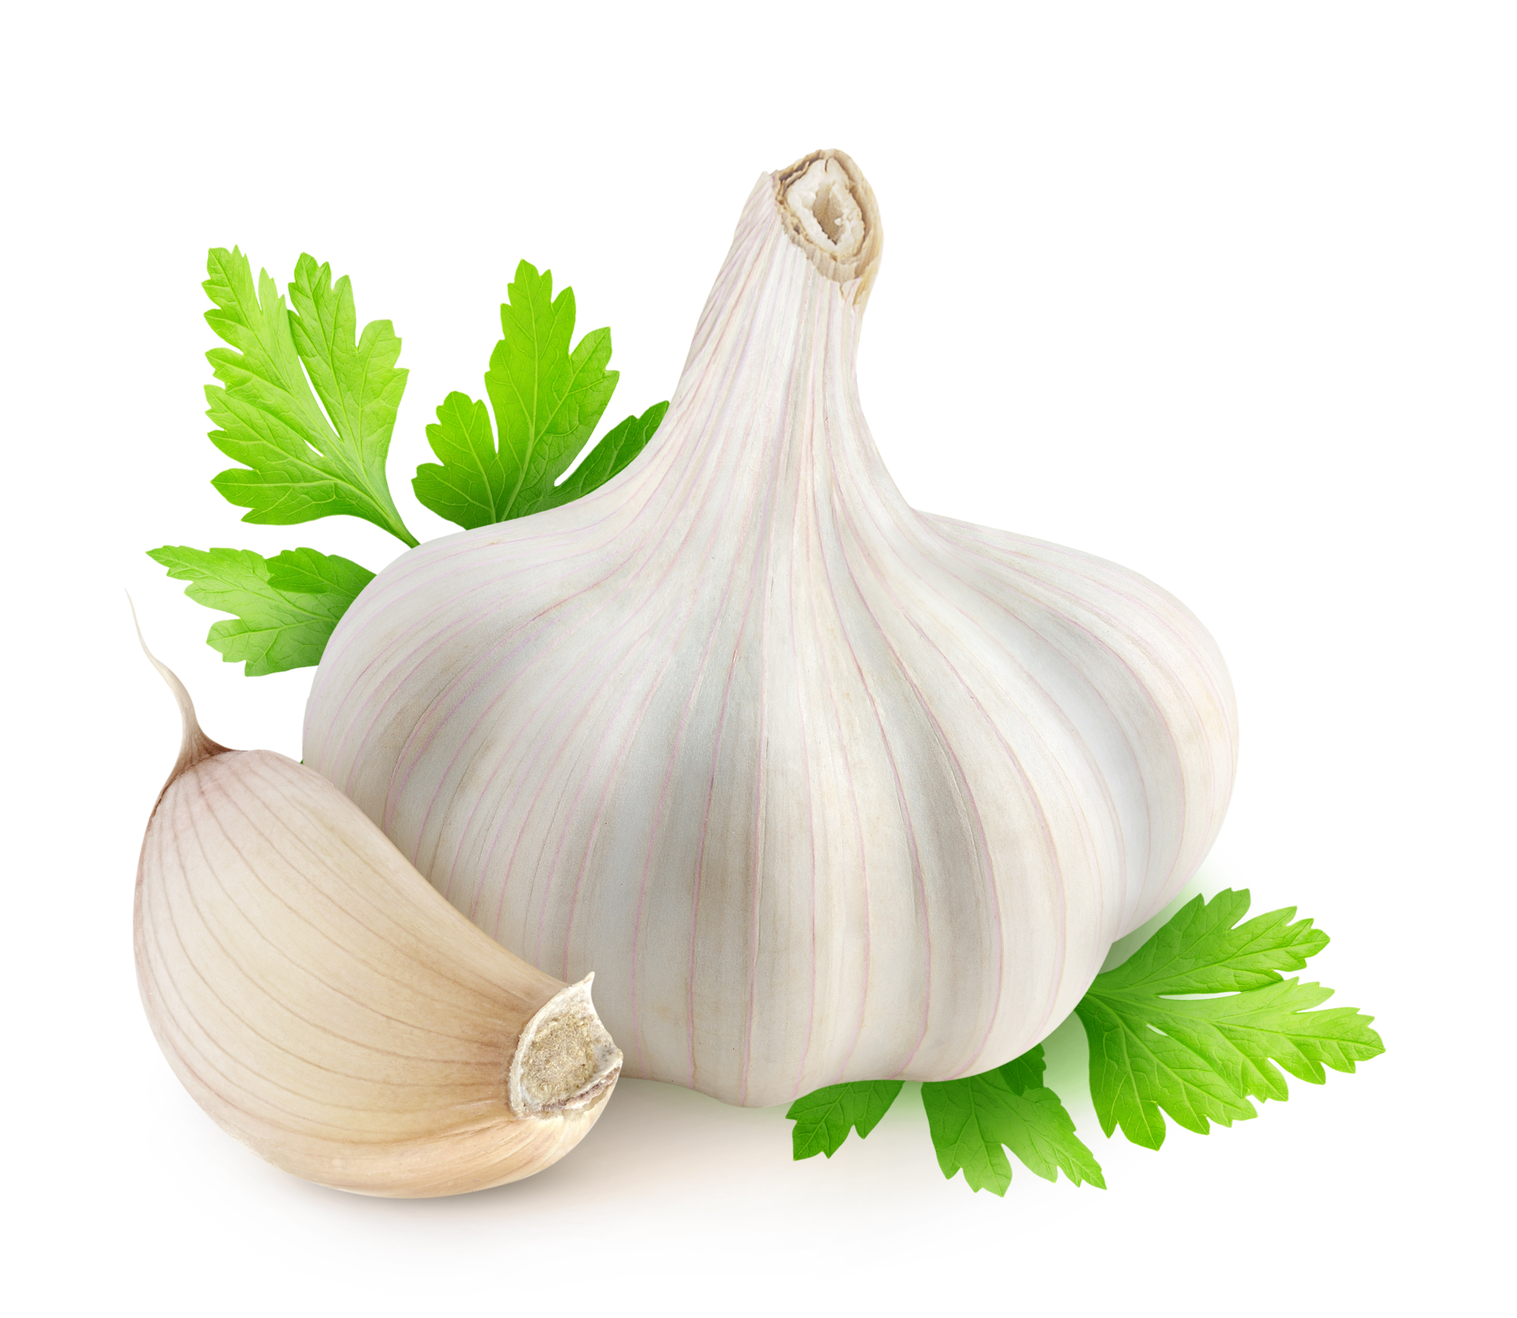 Simple Garlic Picture # 1517x1318. All For Desktop